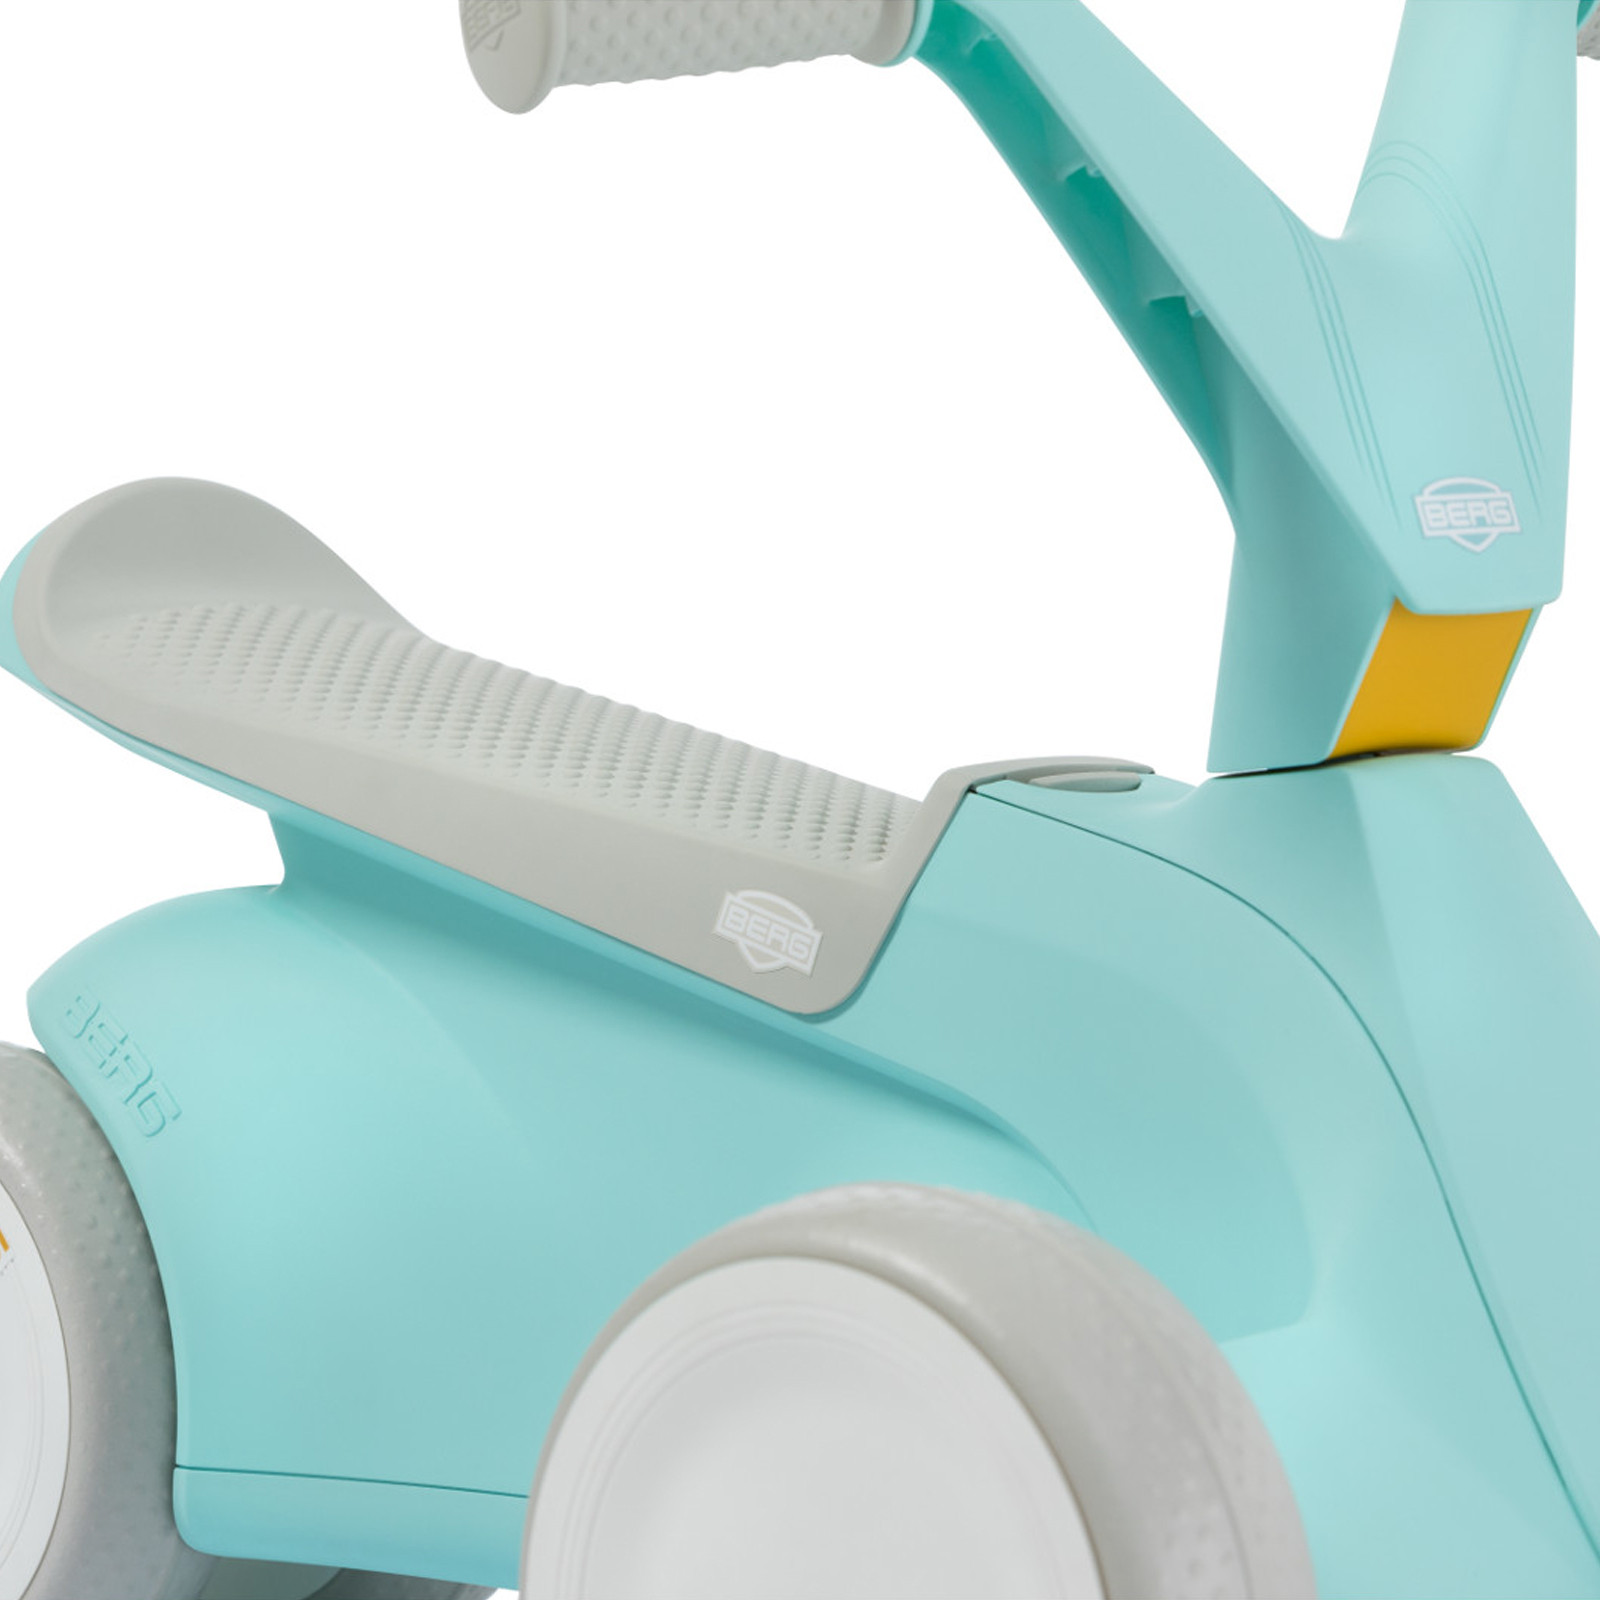 Berg Toys Pedal-Scooter blau 24.50.00.00